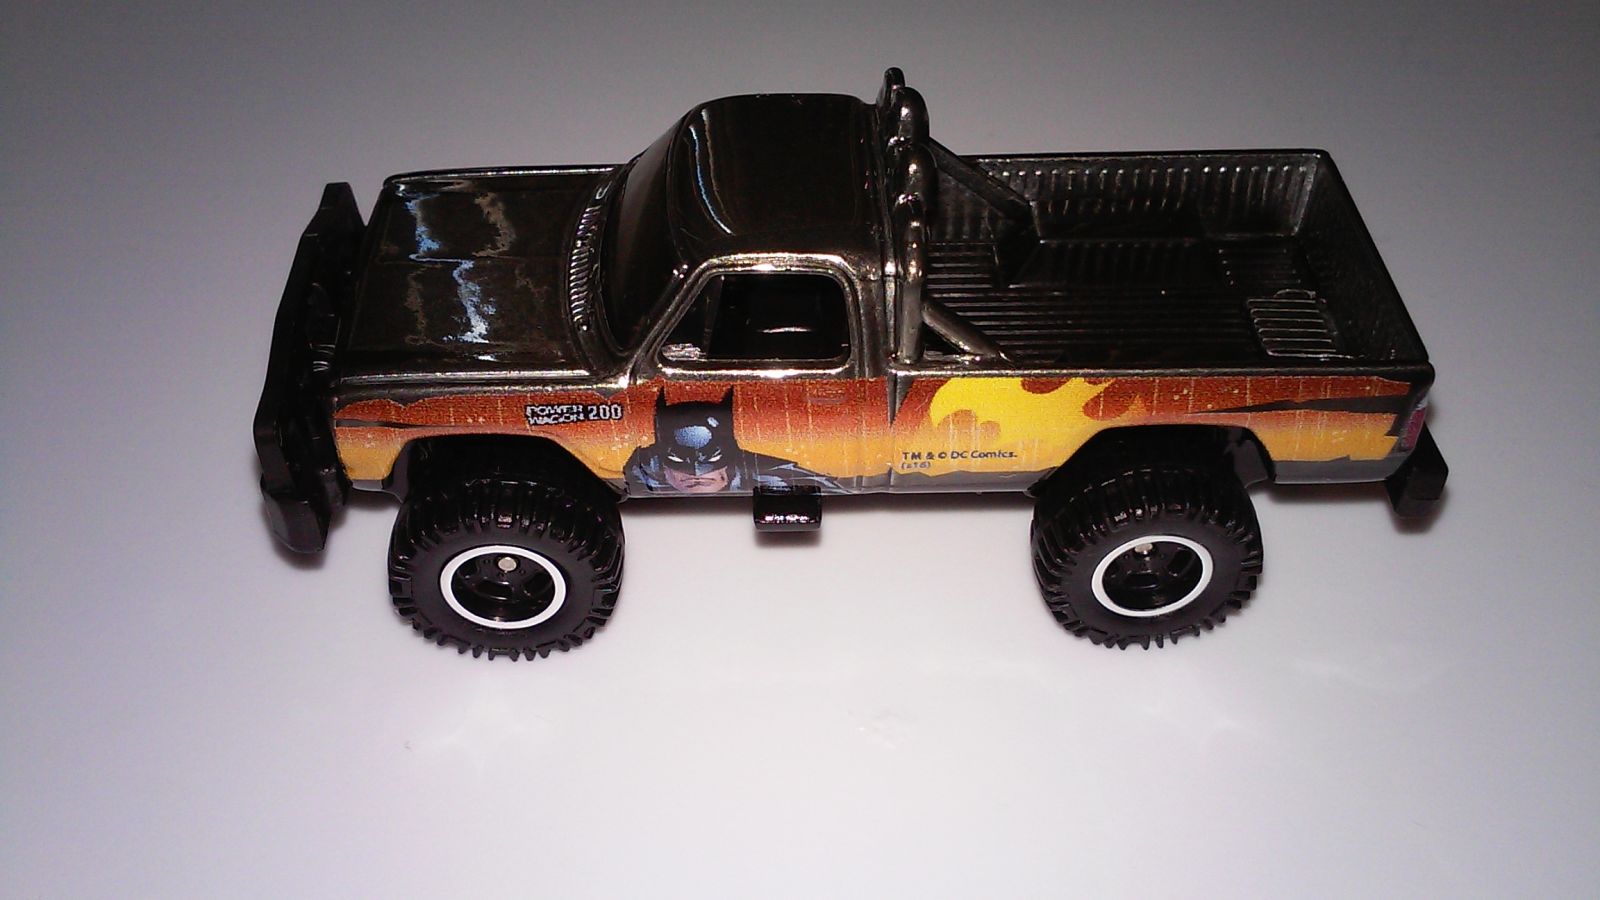 Illustration for article titled Hot Wheels 1980 Dodge Macho Power Wagon